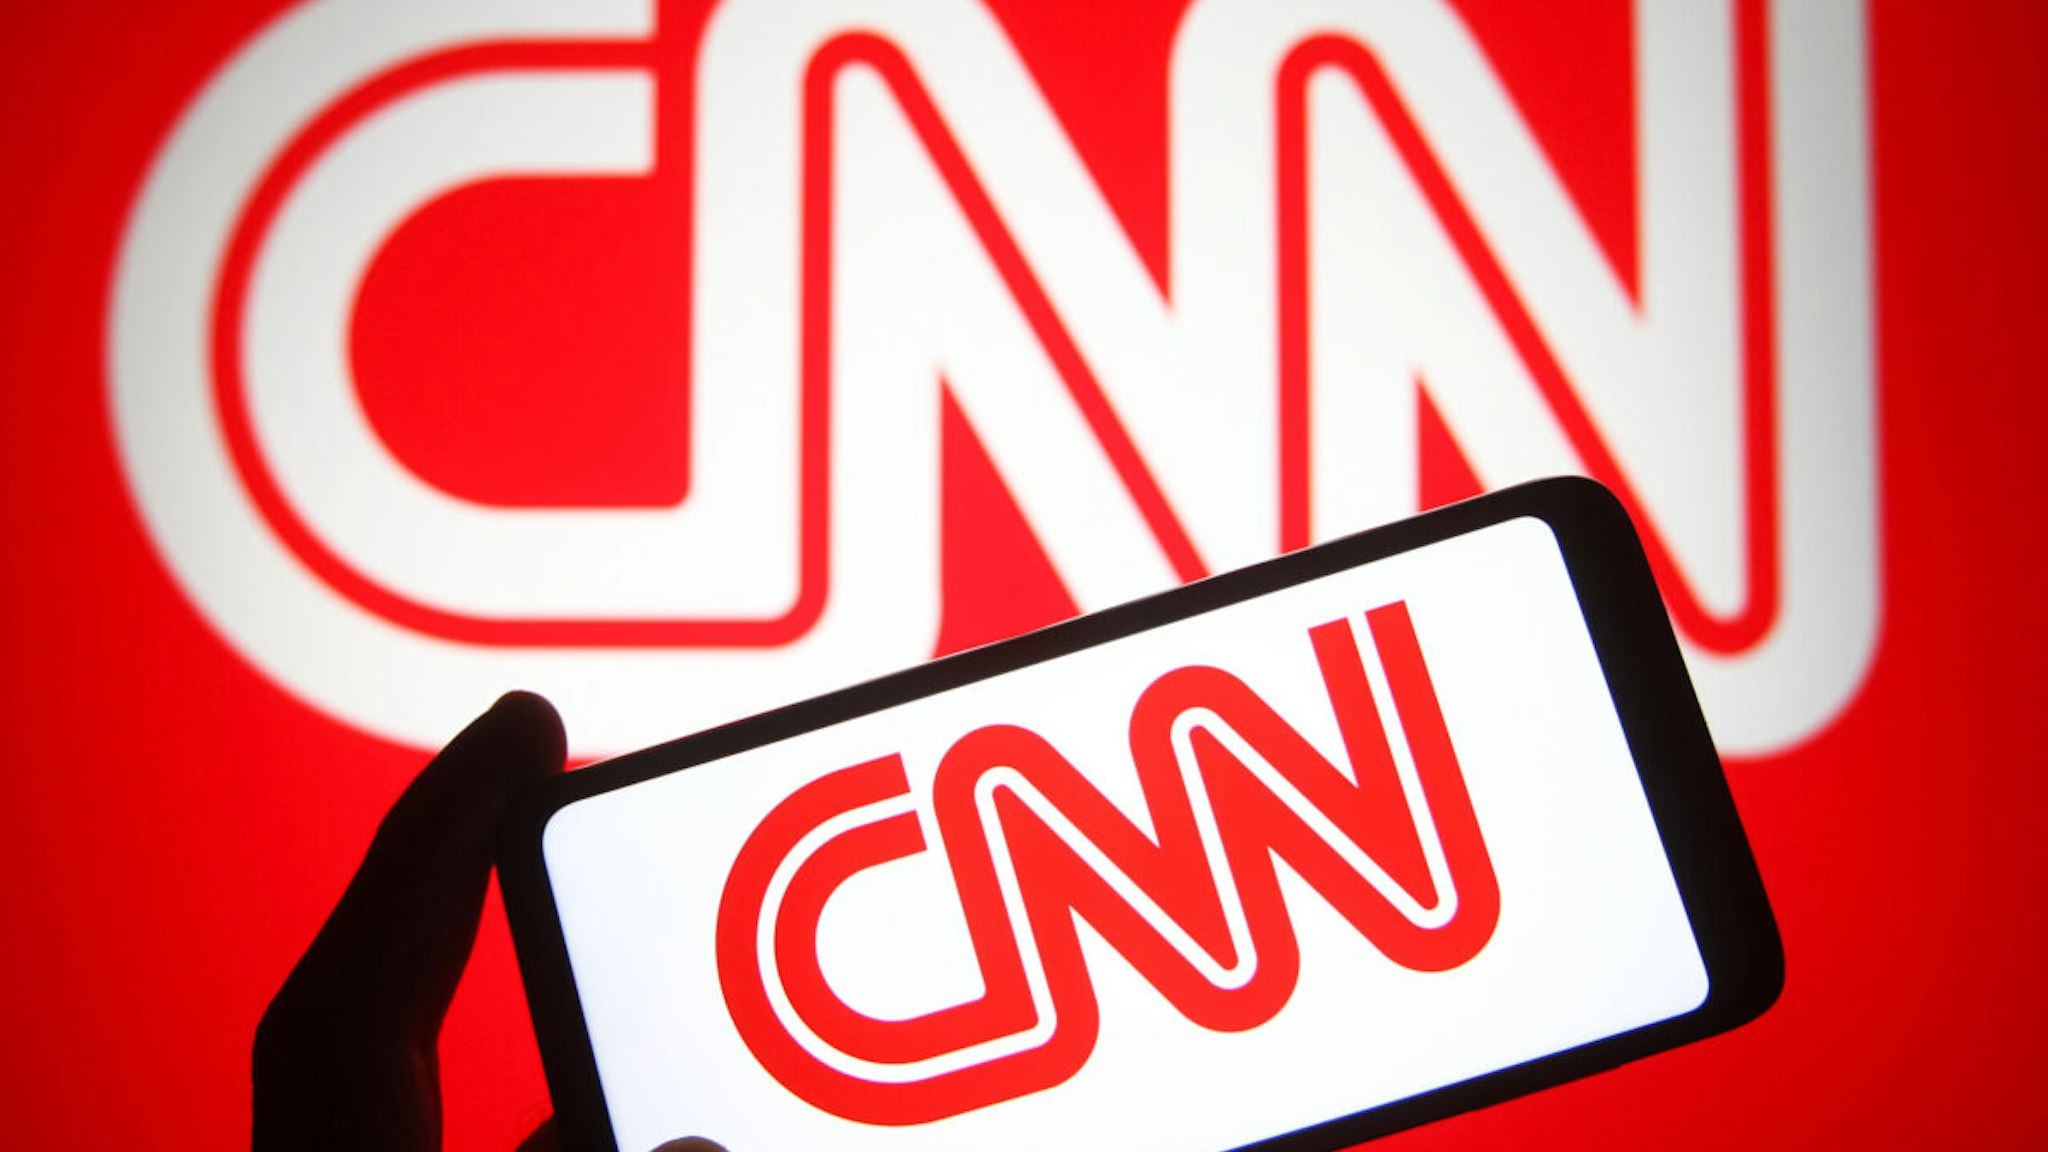 In this photo illustration a CNN (Cable News Network) logo is seen on a smartphone and a pc screen